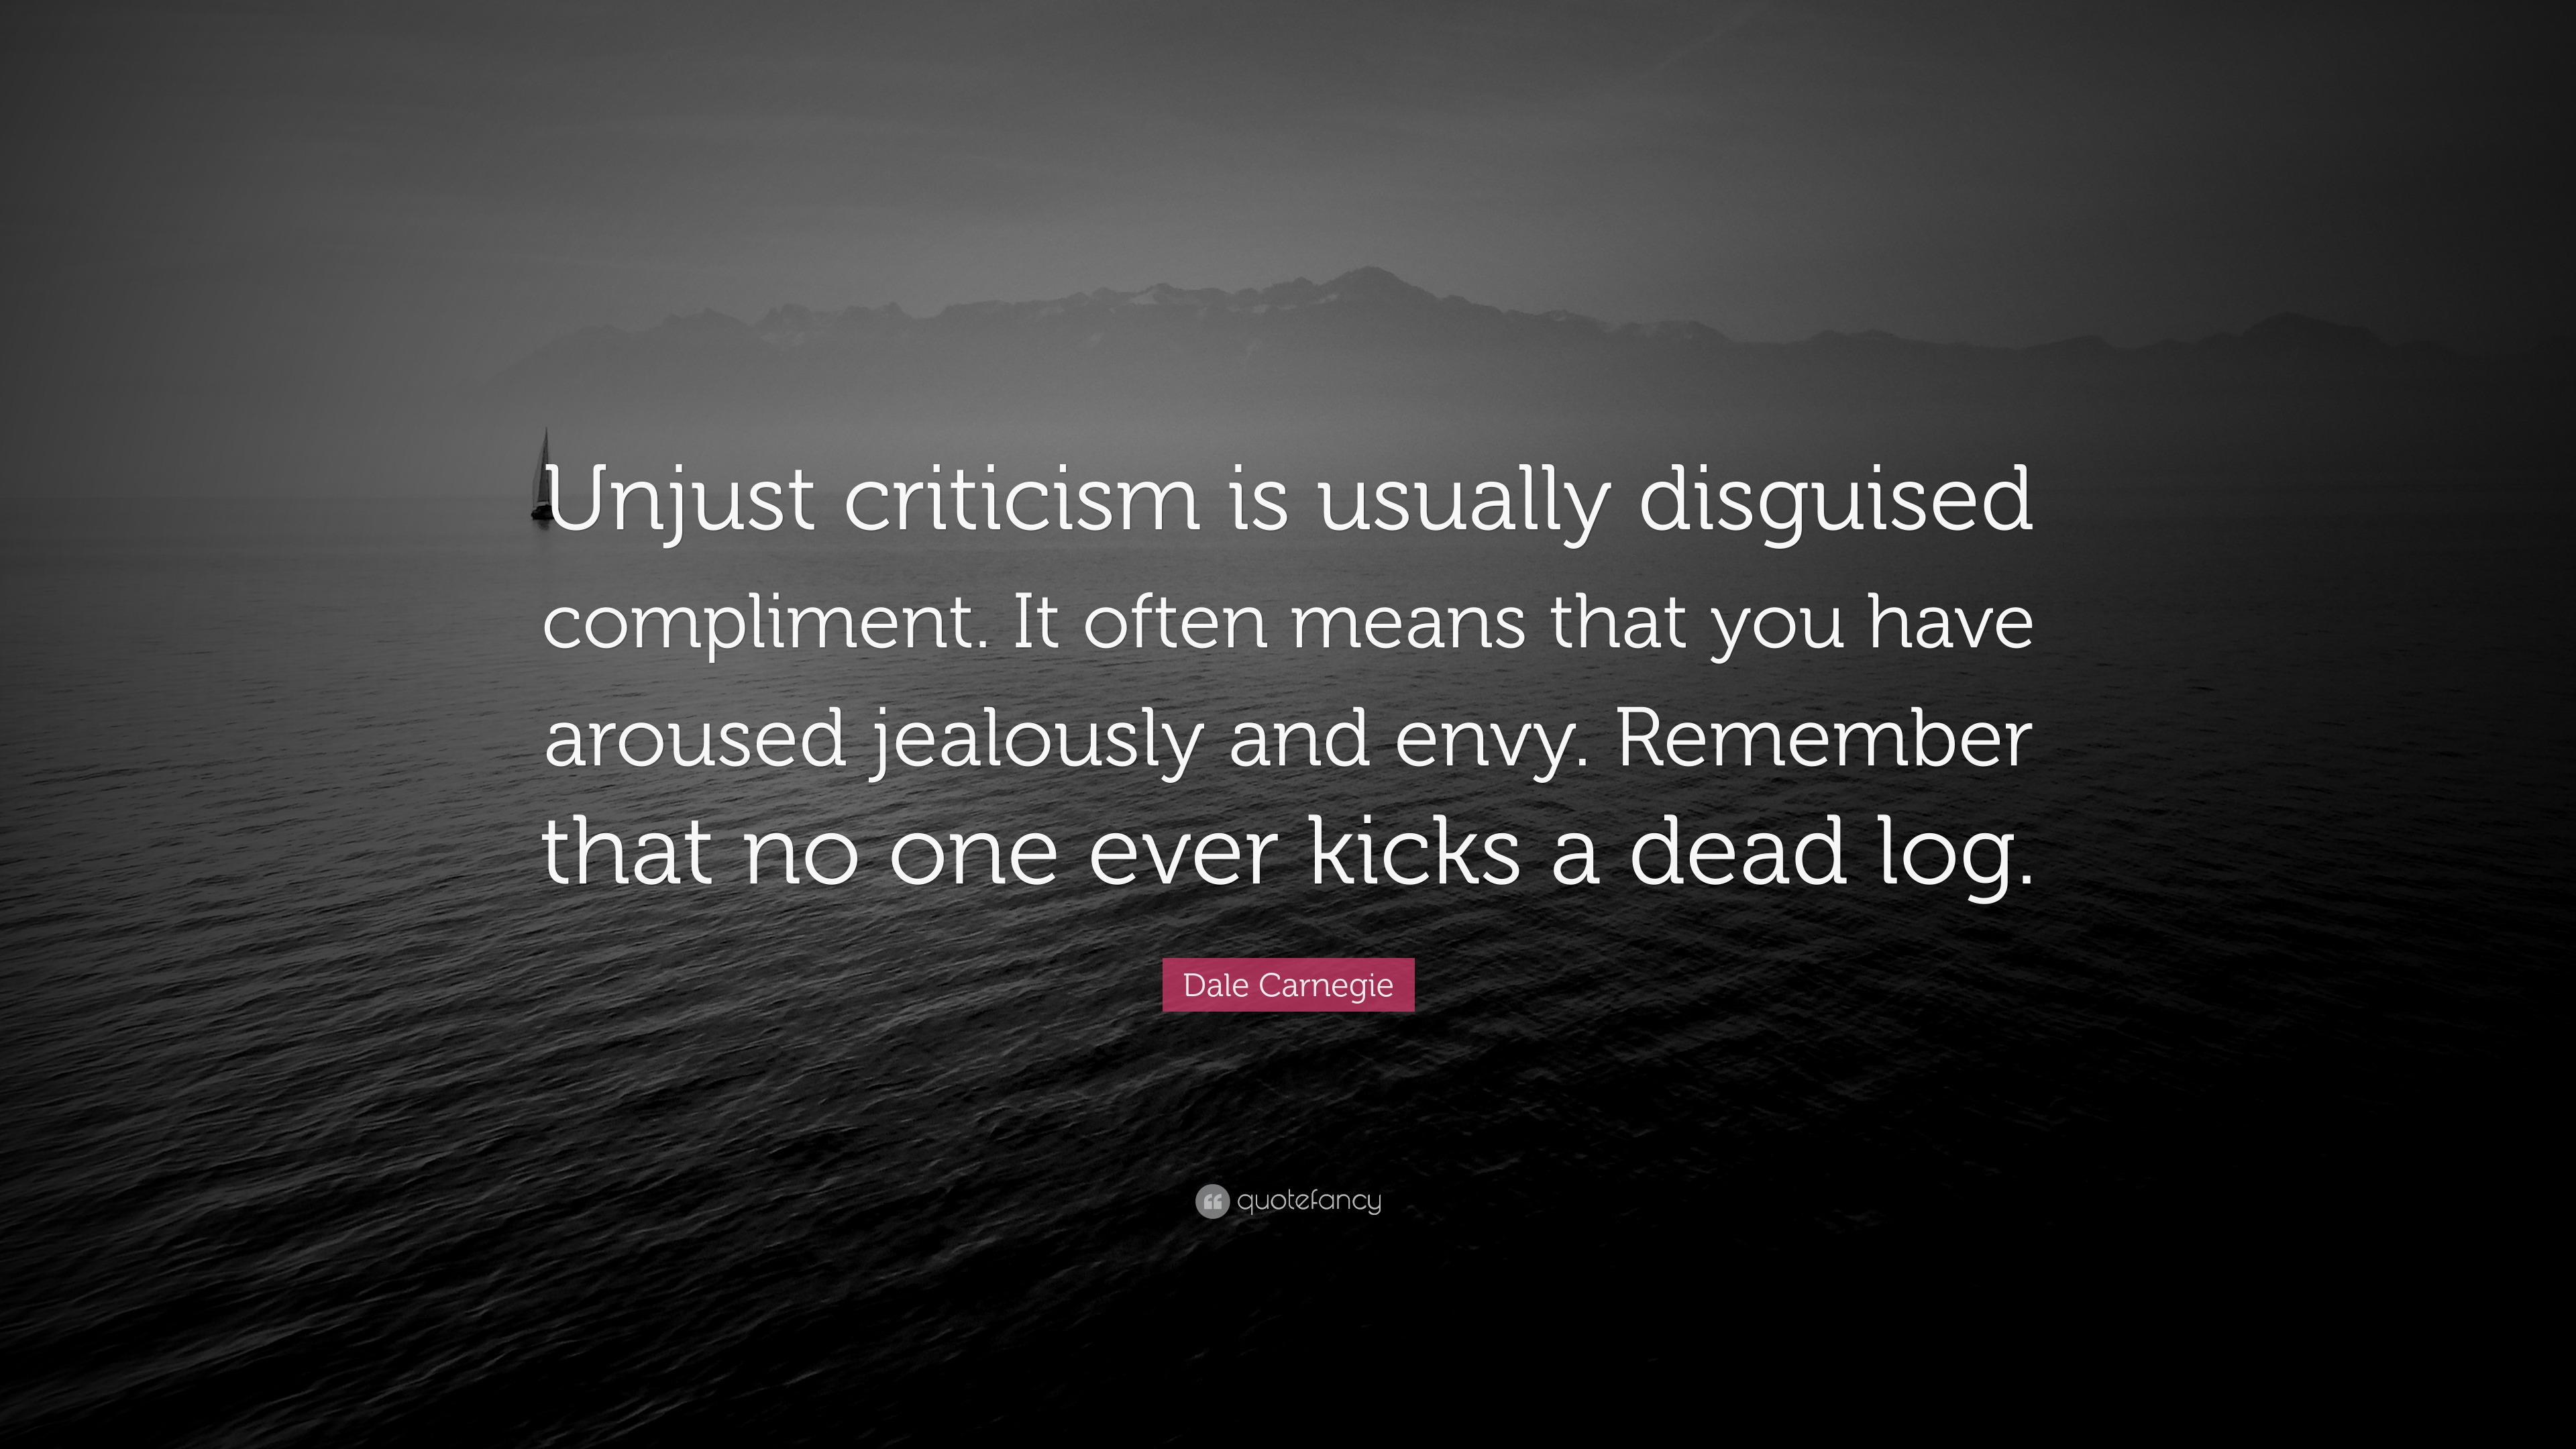 Dale Carnegie Quote: “Unjust criticism is usually disguised compliment